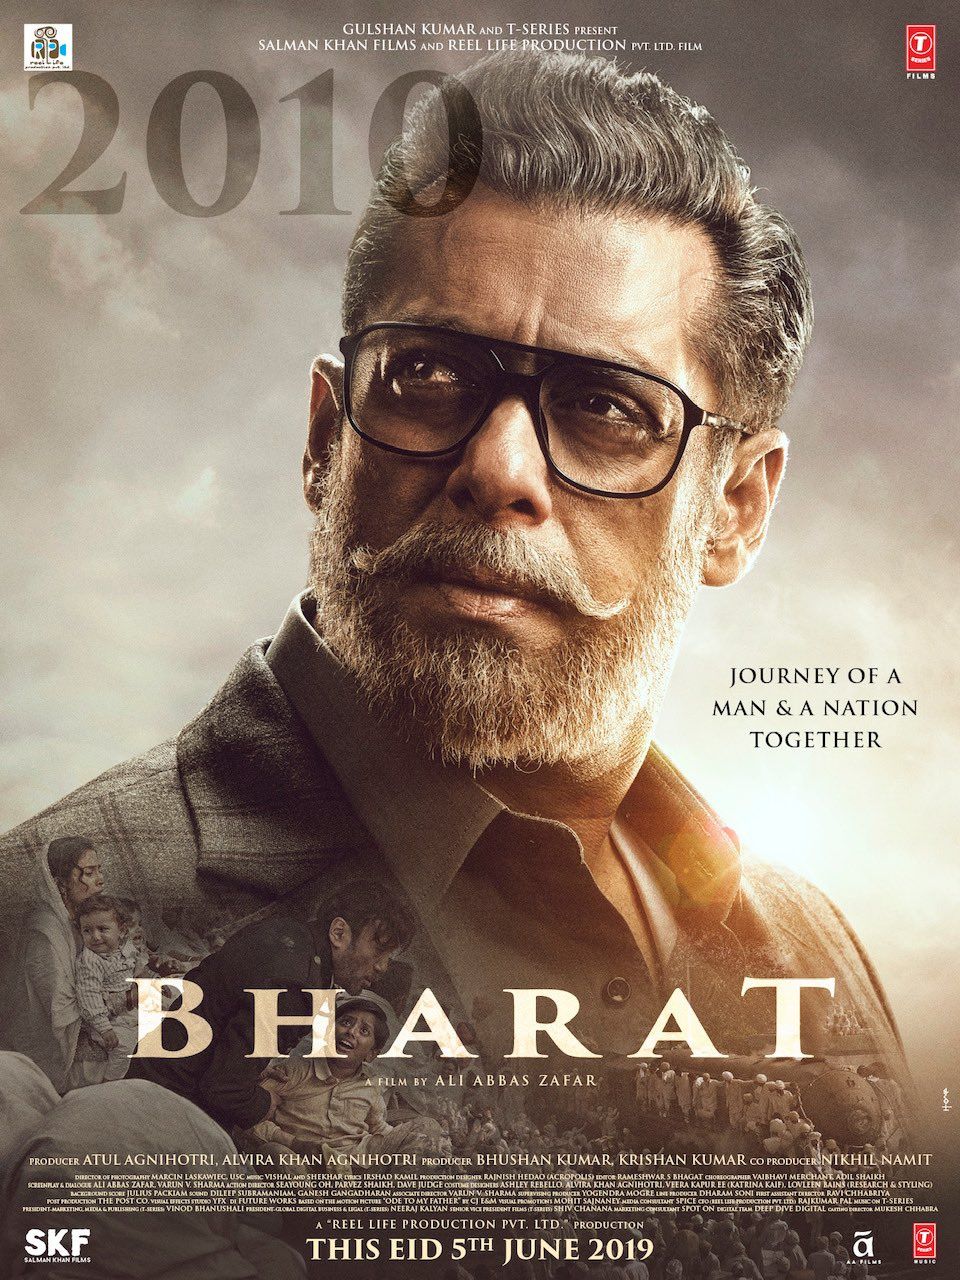 Salman Khan Took This Many Hours For Make-Up To Perfectly Achieve The Old Man Look For Bharat!